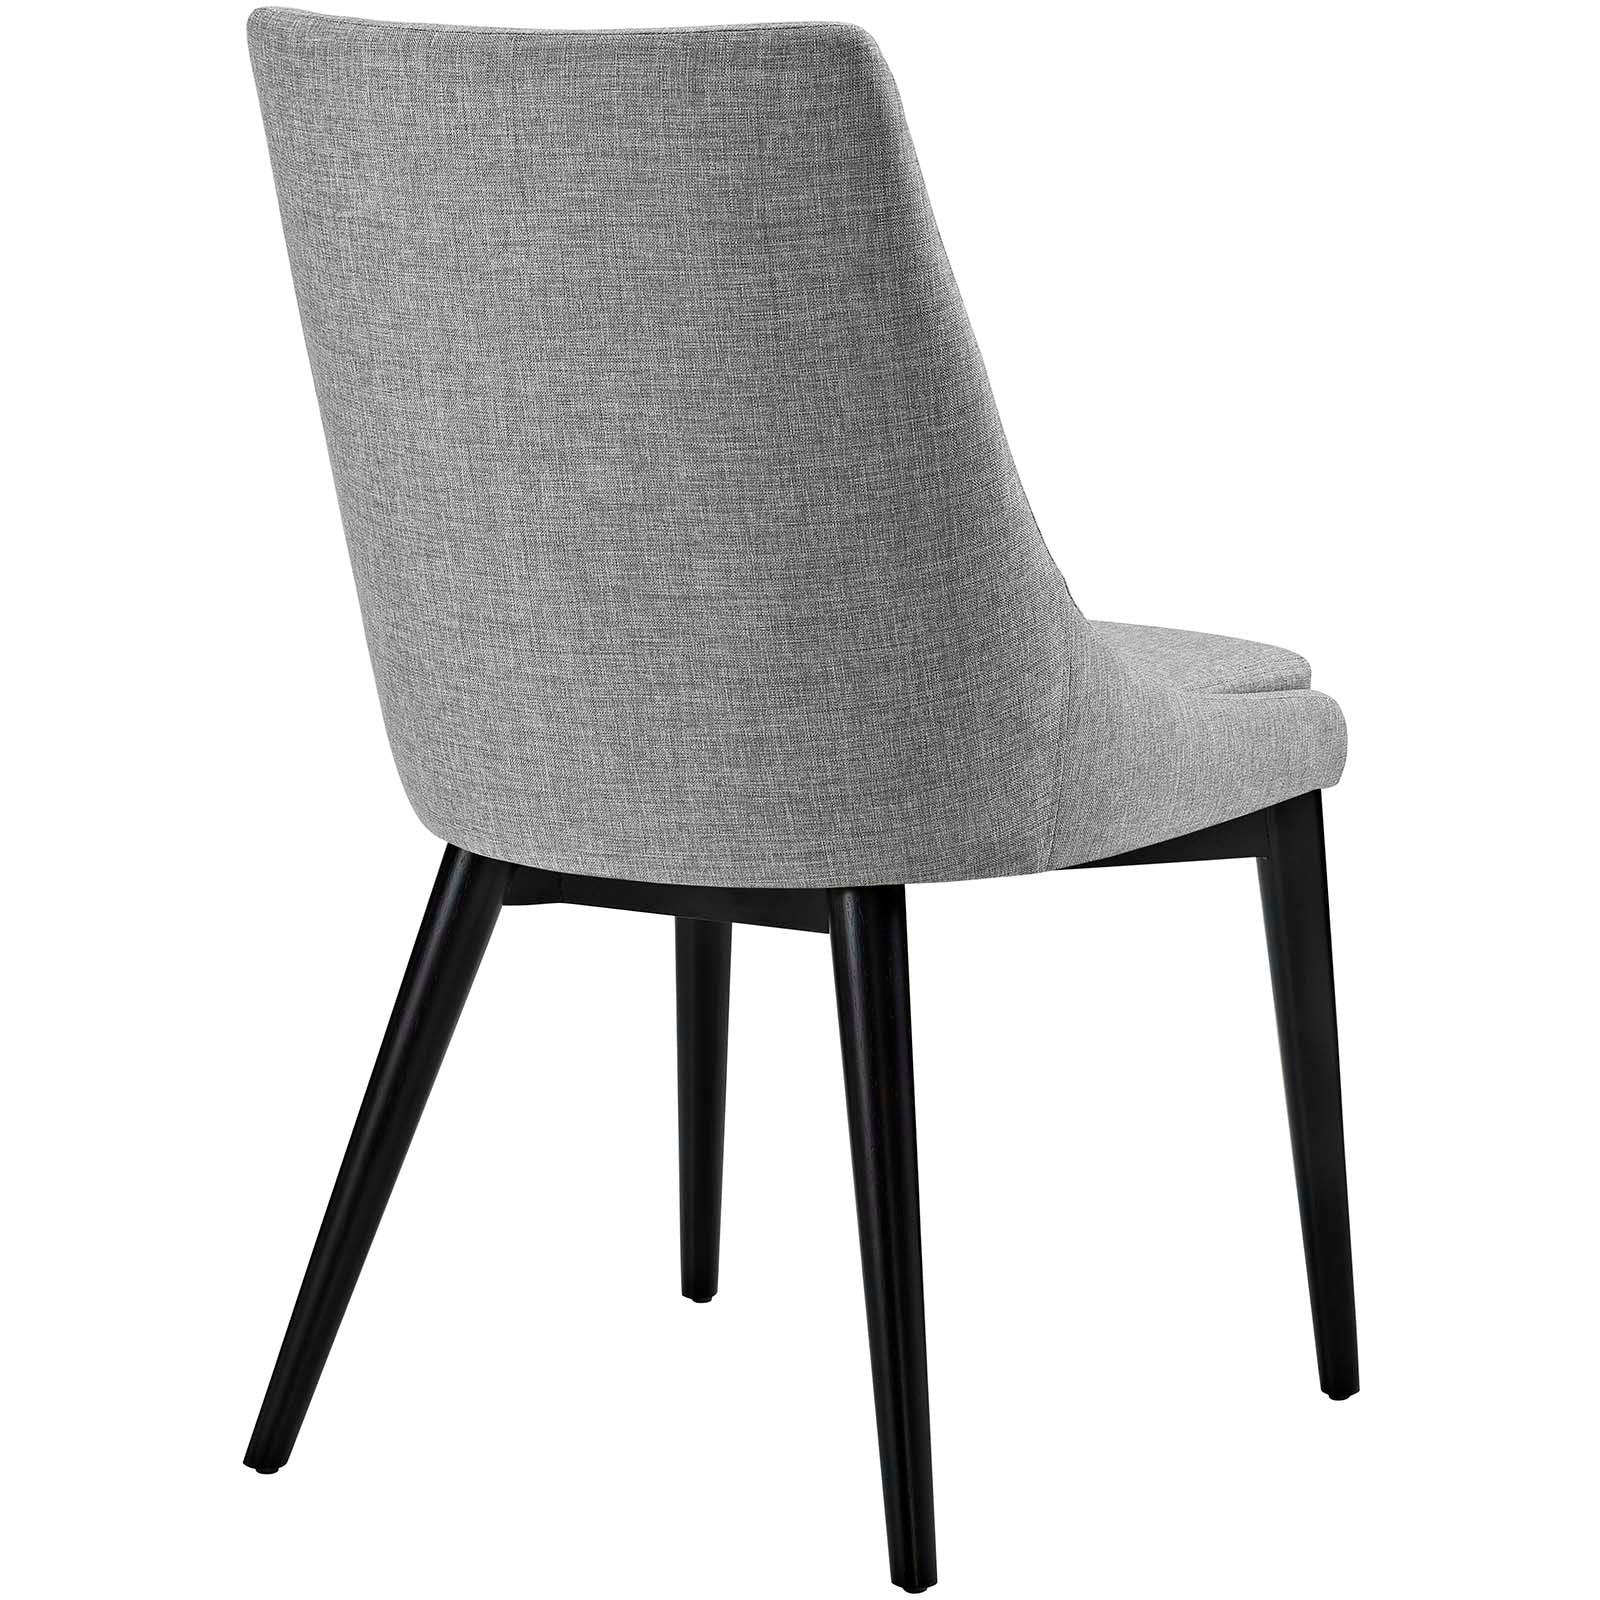 Modway Dining Chairs - Viscount Fabric Dining Chair Light Gray